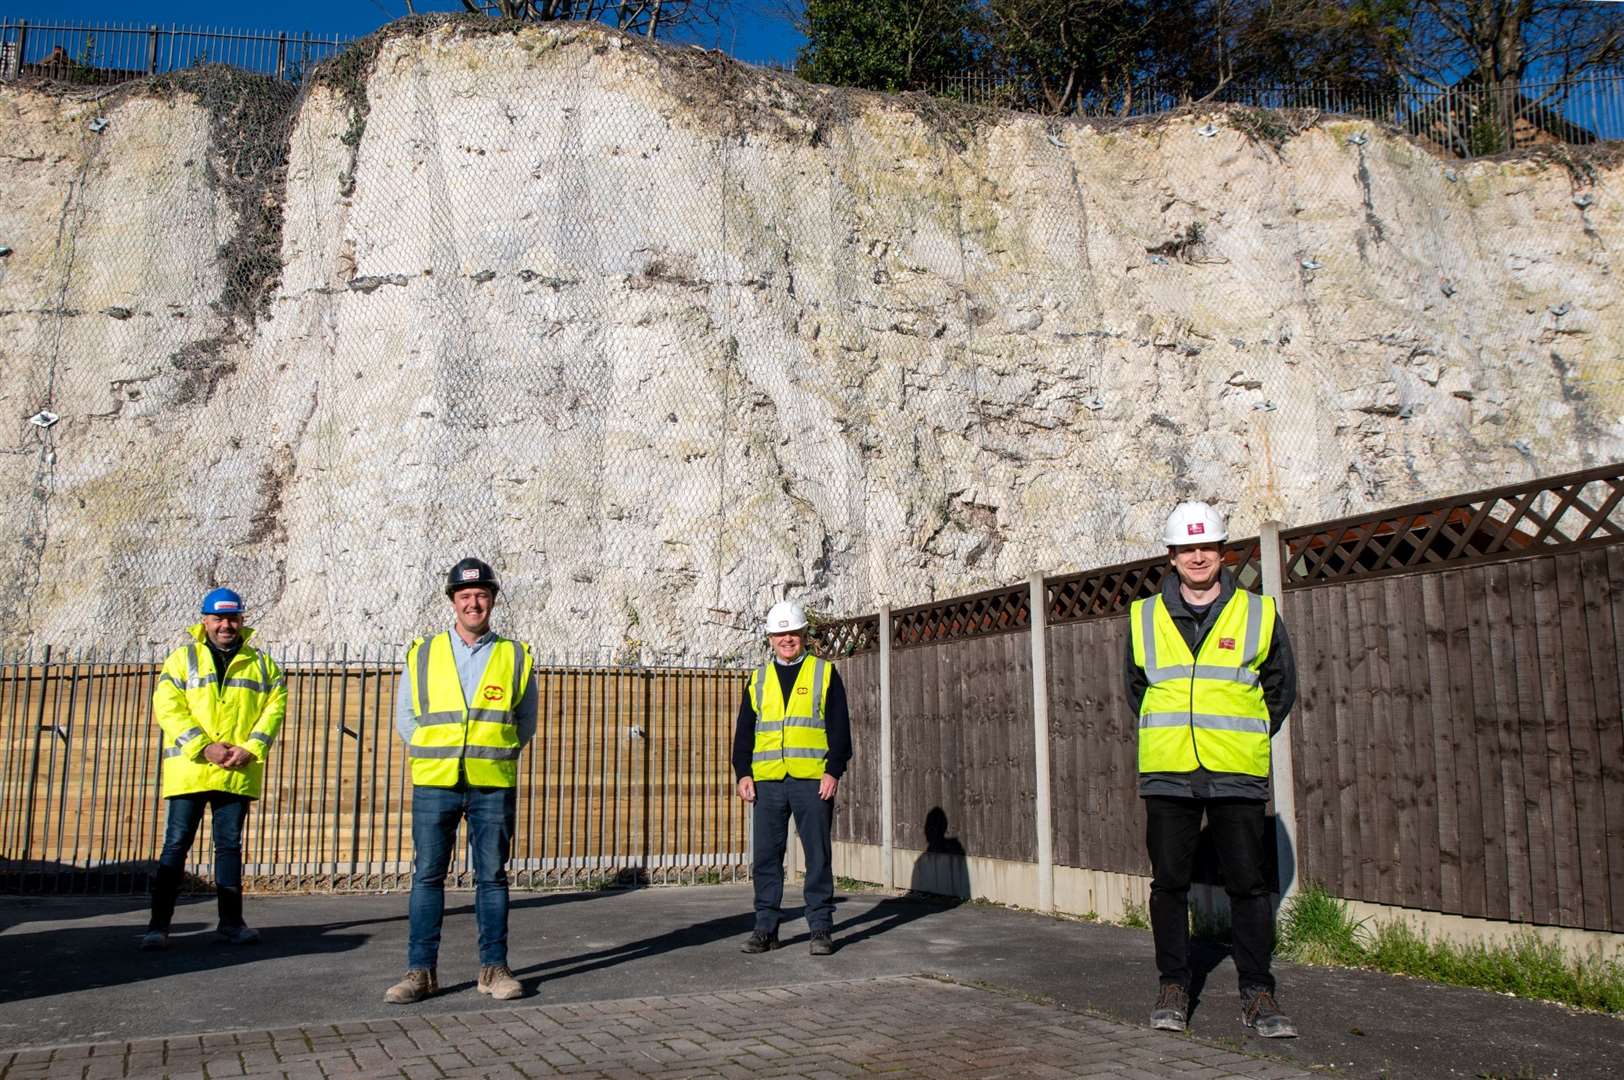 The cliff face next to Eagles Road has now been stabilised to prevent any future erosion. From left: Paul Koster, Housing Maintenance Manager at Dartford Borough Council, Alex Deysell, Site Agent at Clifford Devlin, Tim Clifford, Managing Director at Clifford Devlin and Andrew Wright, Director at Ingleton Wood. Picture: Clare Banks Photography